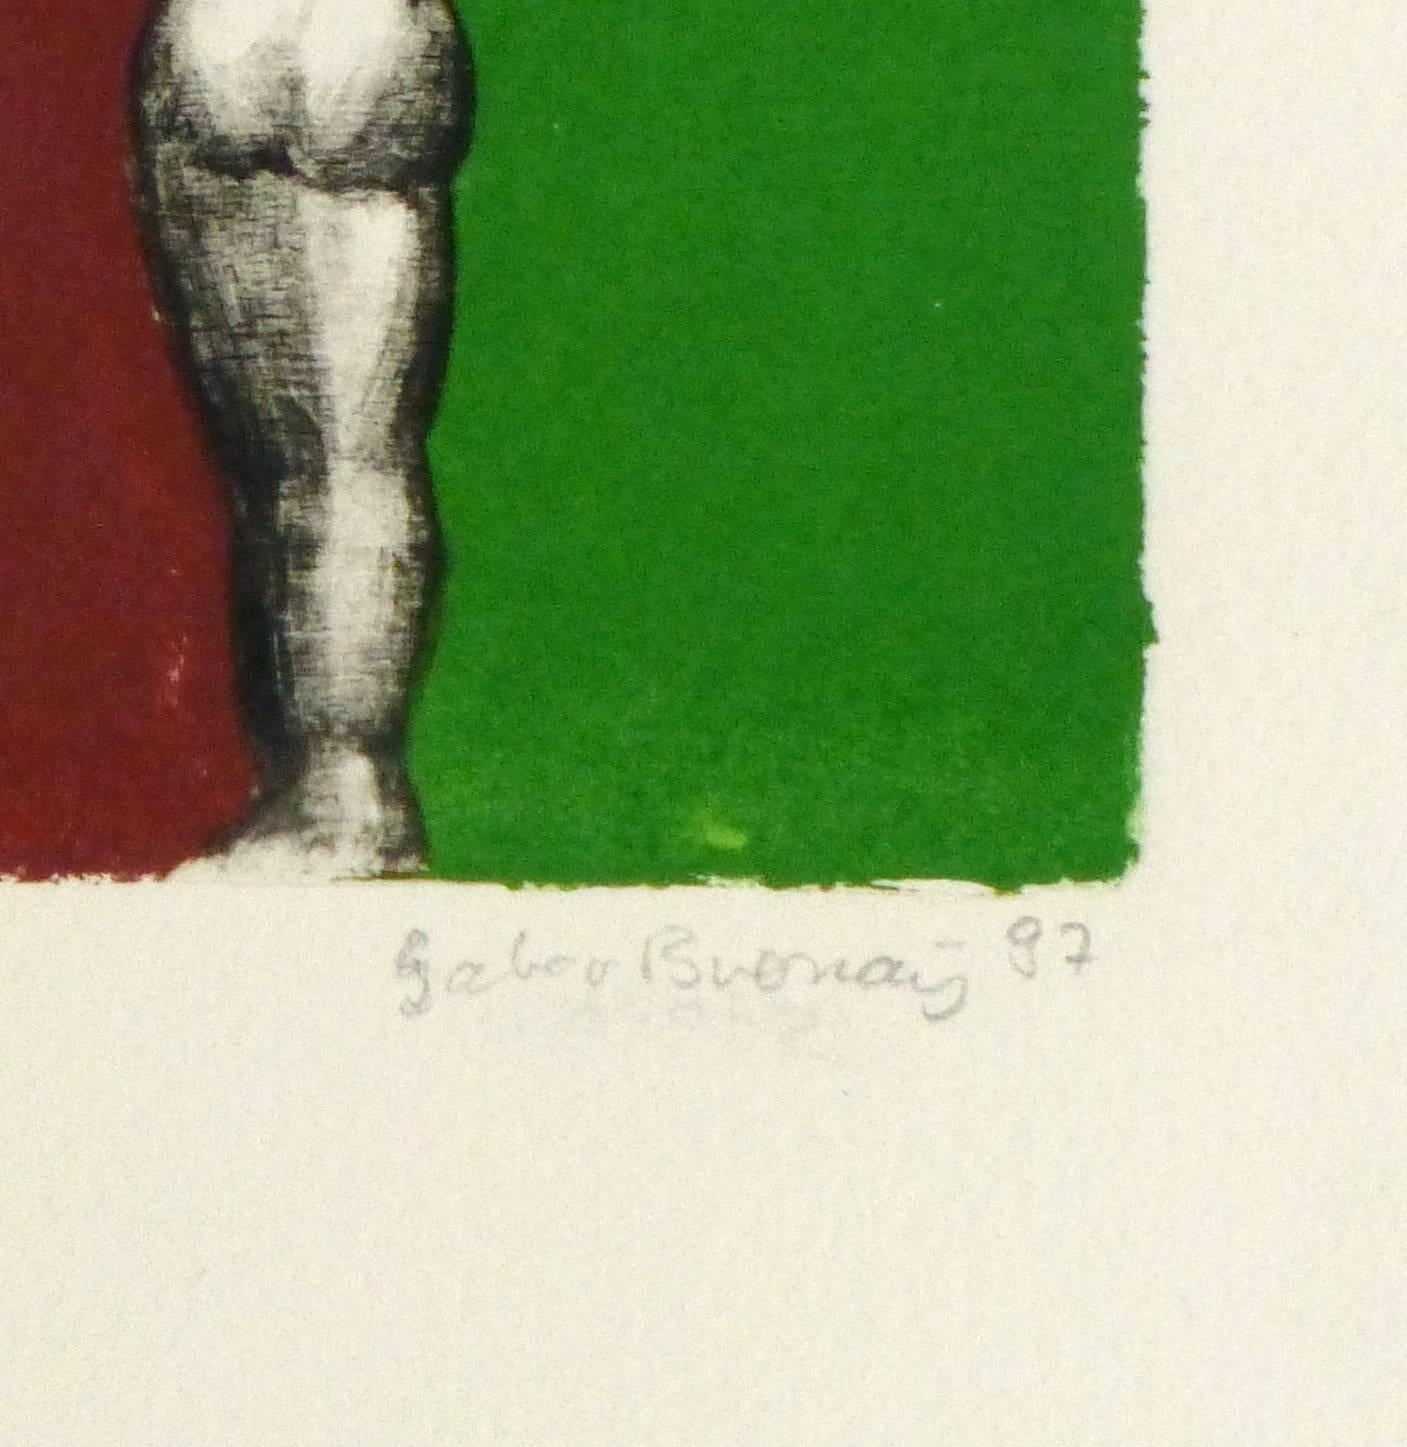 French Etching - Female Nude Dividing Two Colors (Red and Green) - Print by Unknown